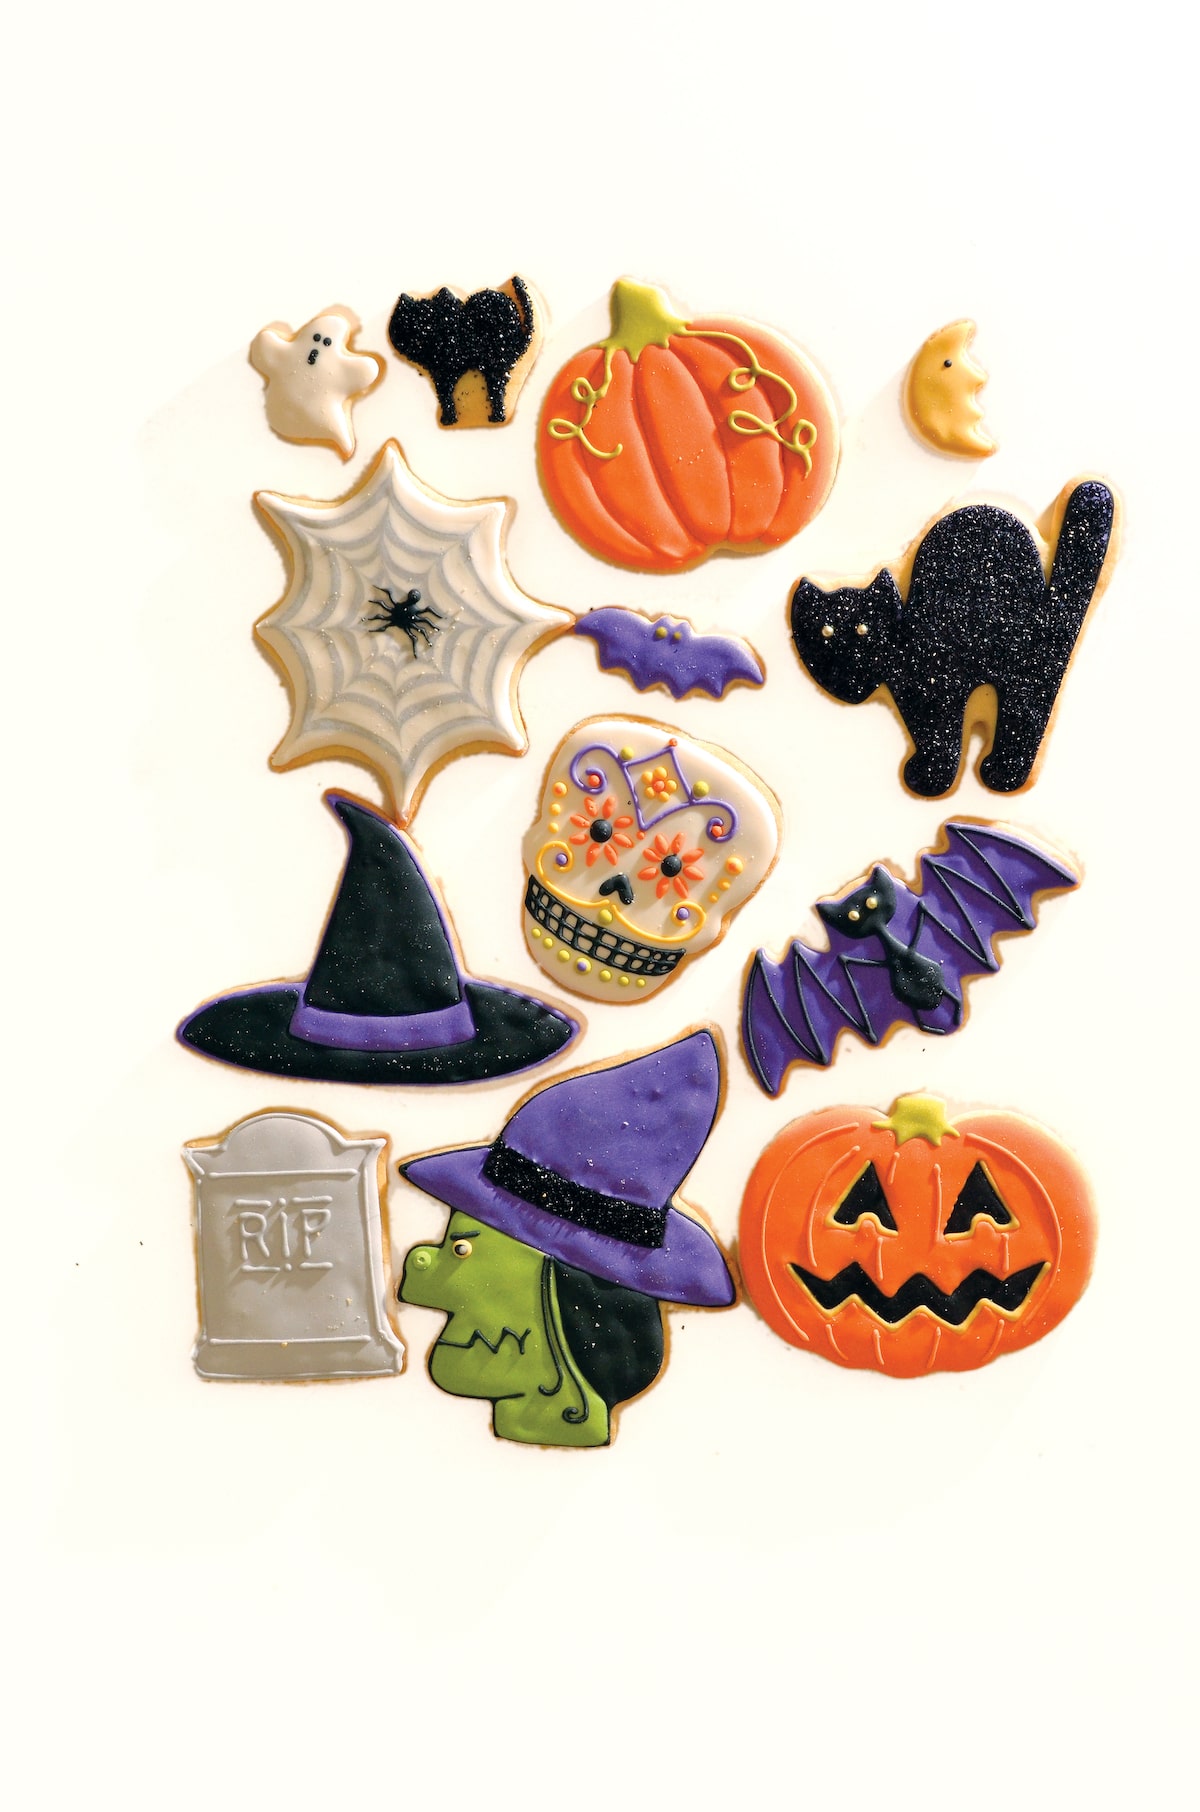 assortment of adorable Halloween cookies on table.